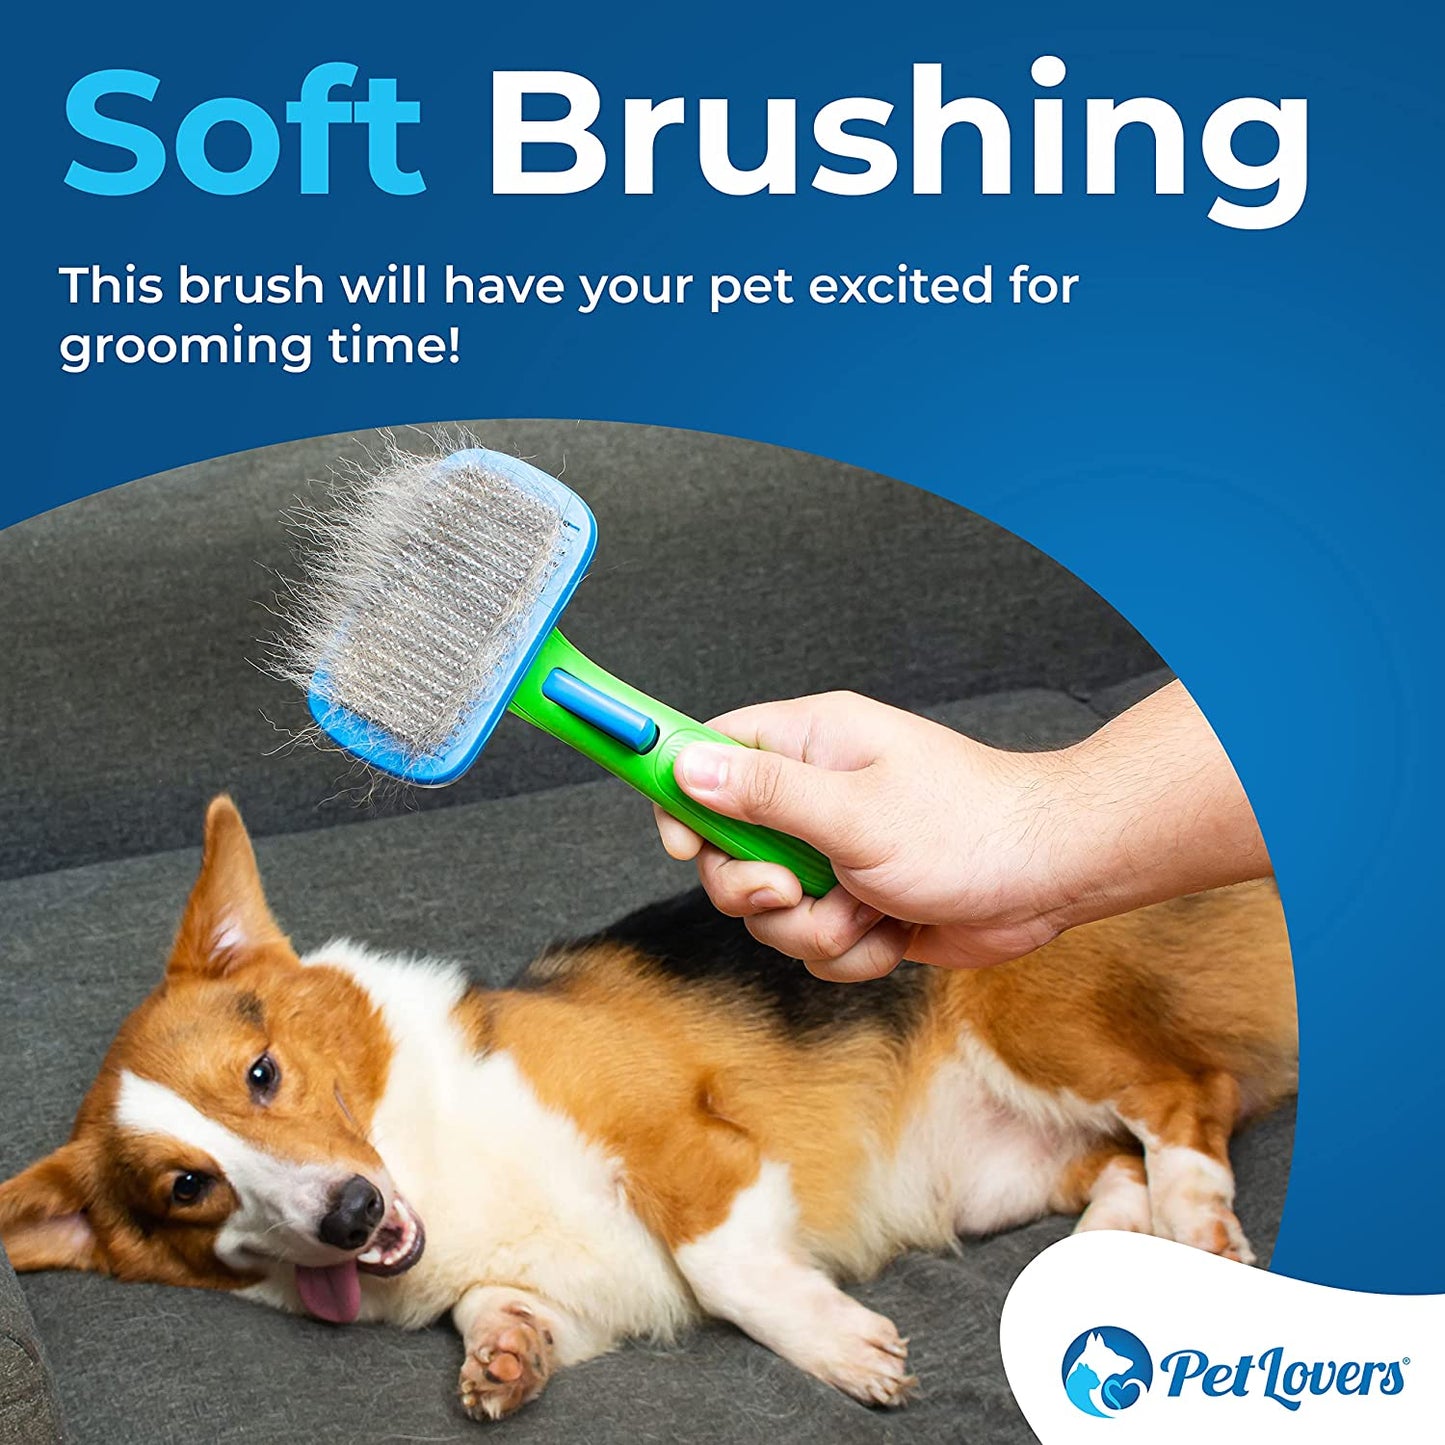 New EzSlicker Brush - Self Cleaning Dog and Cat Hair Brush, Efficient Shedding Grooming Tool for Long and Short Haired Dogs & Indoor Cats, Deshedding Comb for Fur Coats